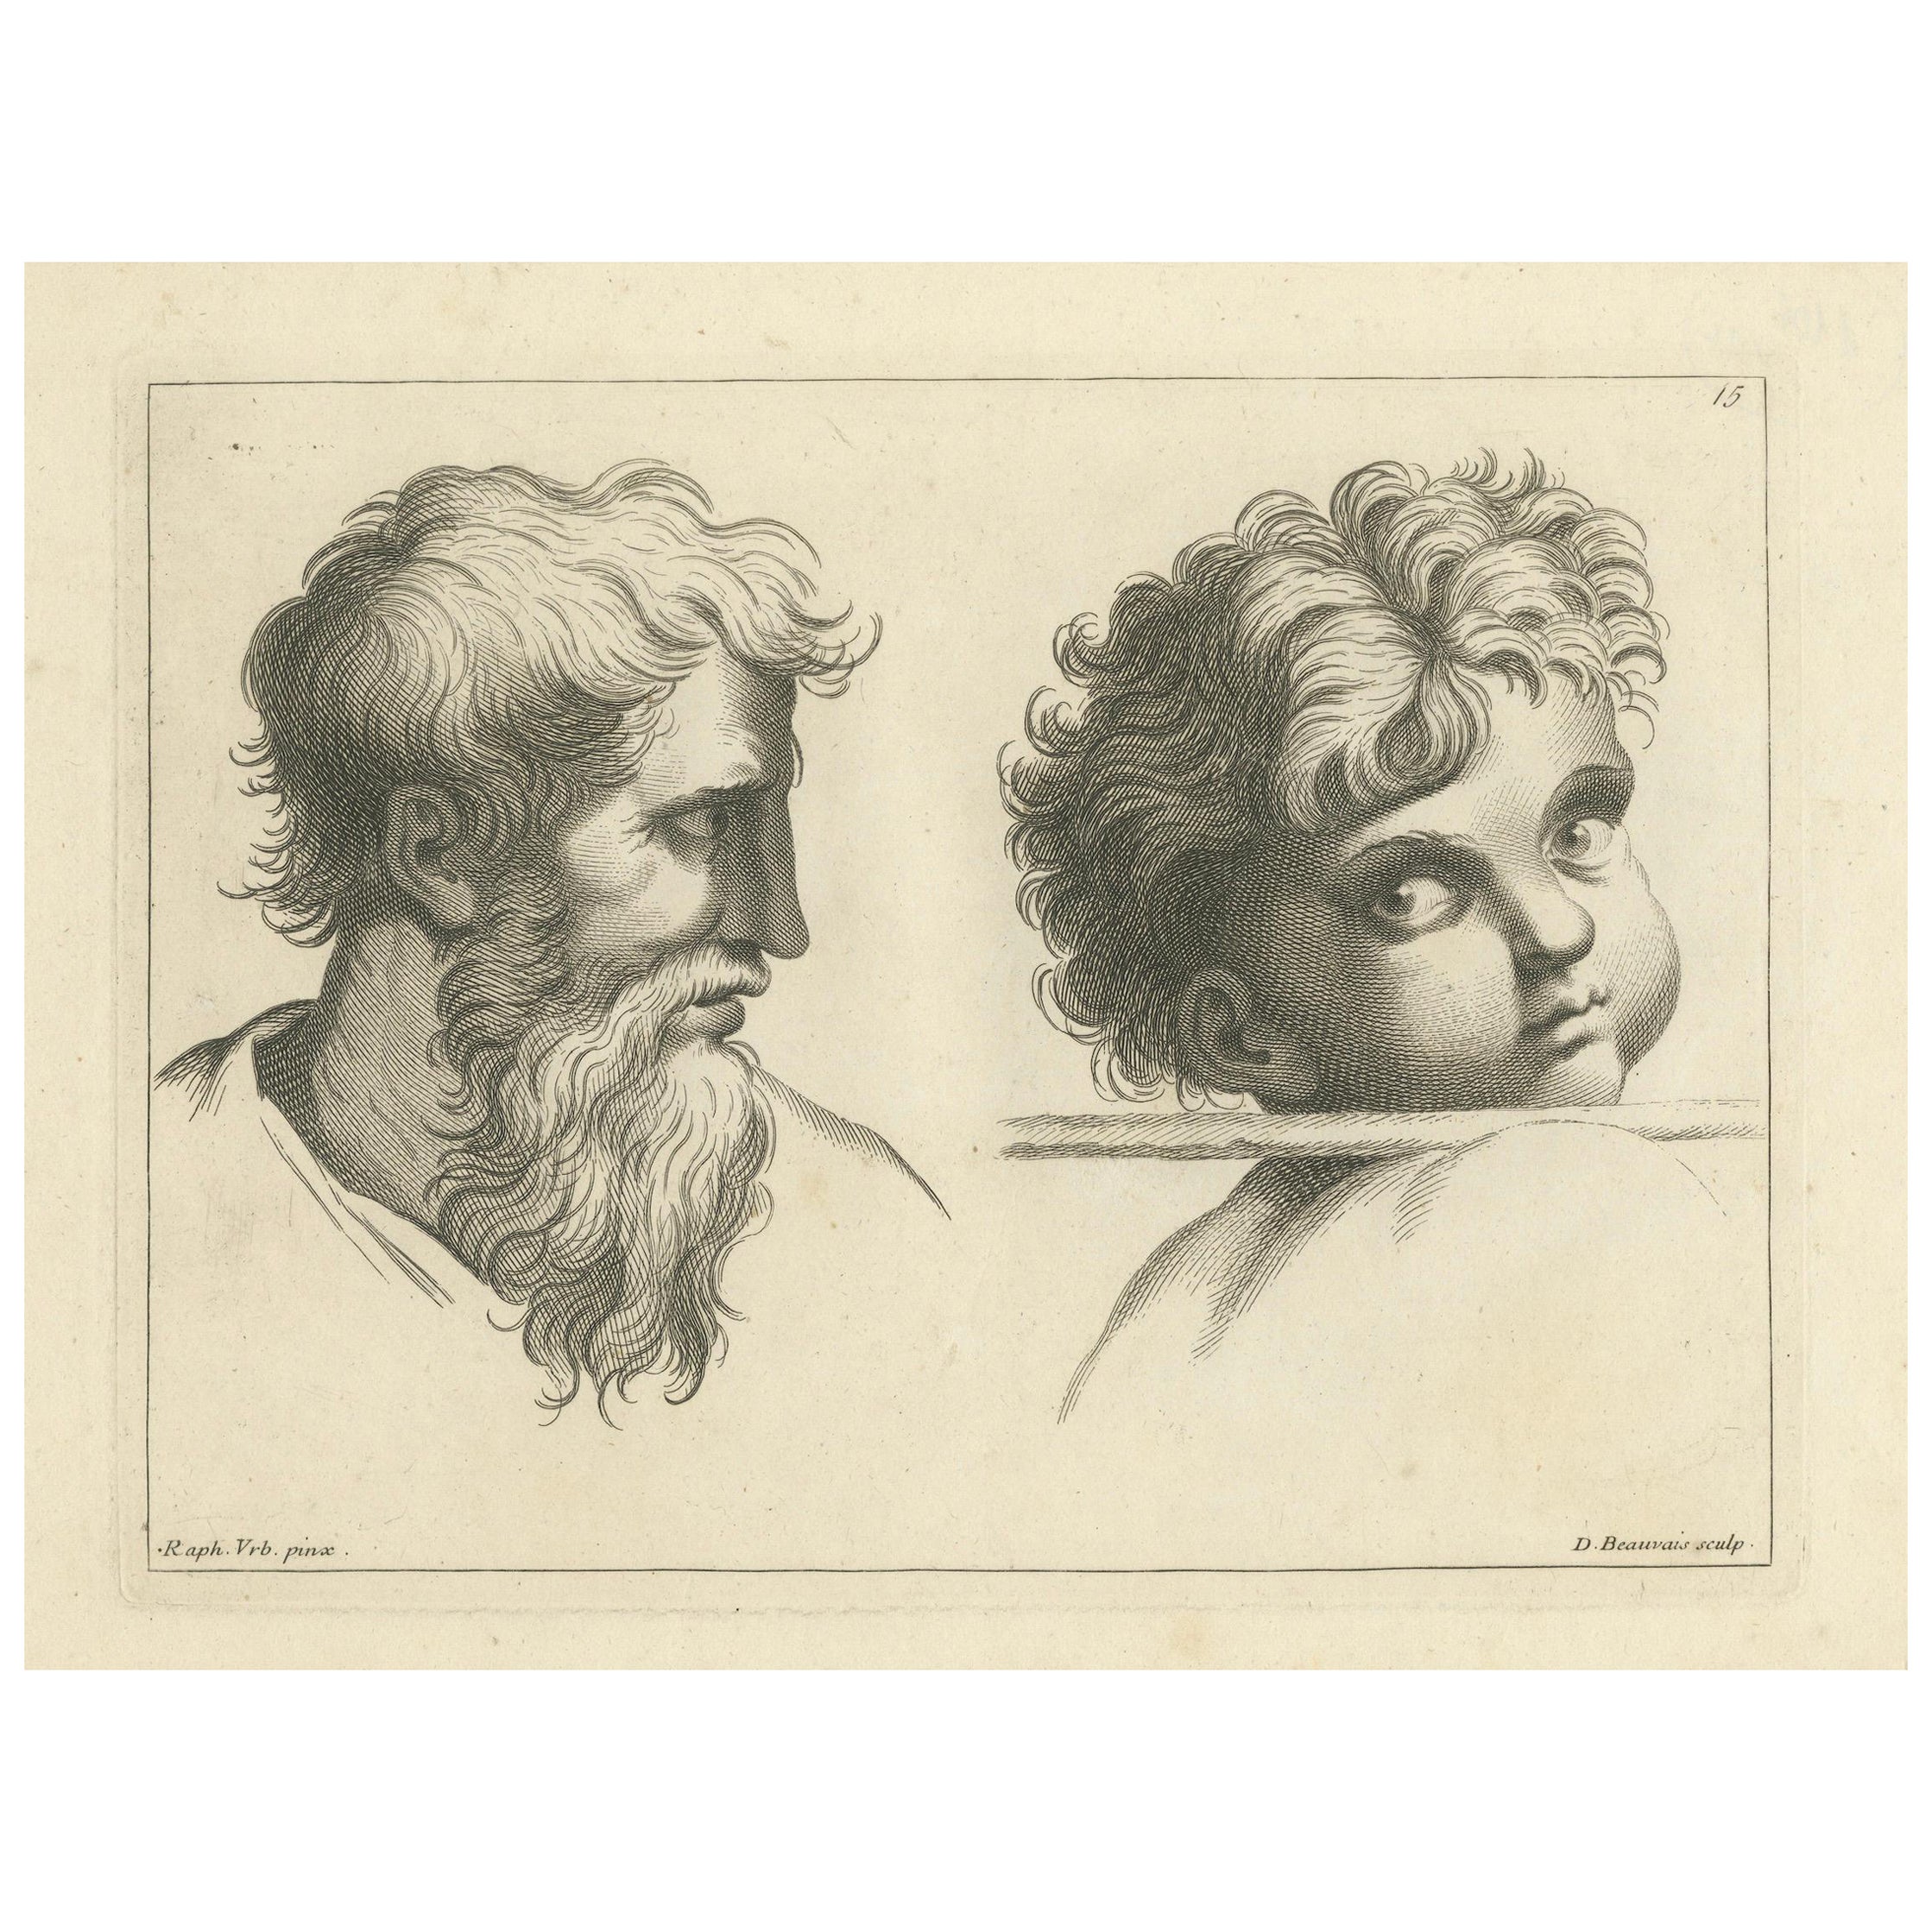 Generations in Profile: Time's Contrast by Beauvais, 1740